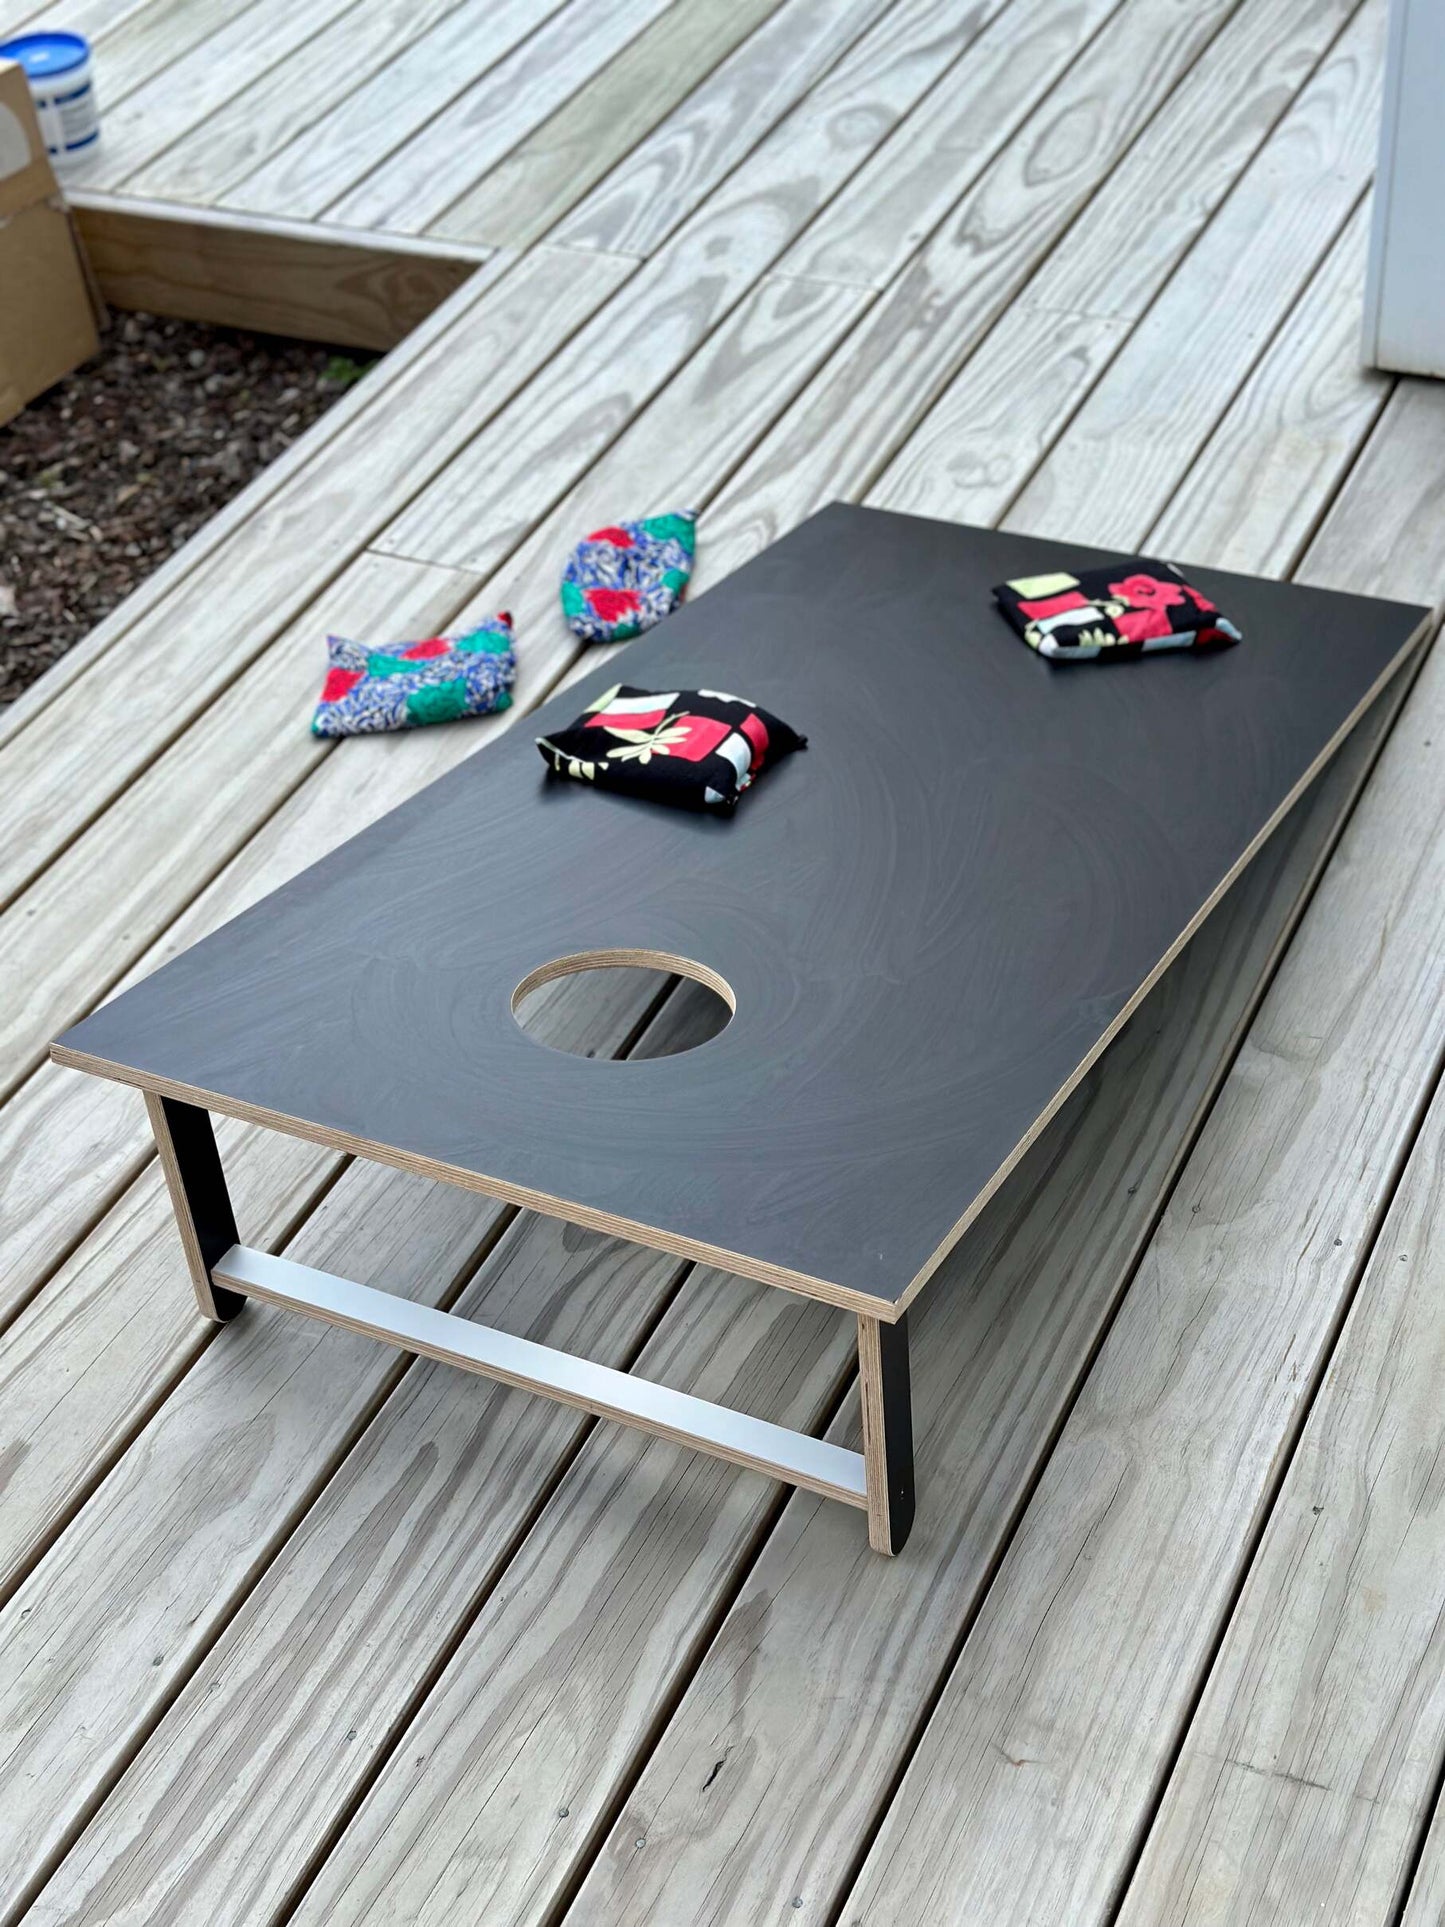 Upgrade your outdoor activities with our Cornhole game board. Ideal for indoor and outdoor enjoyment.